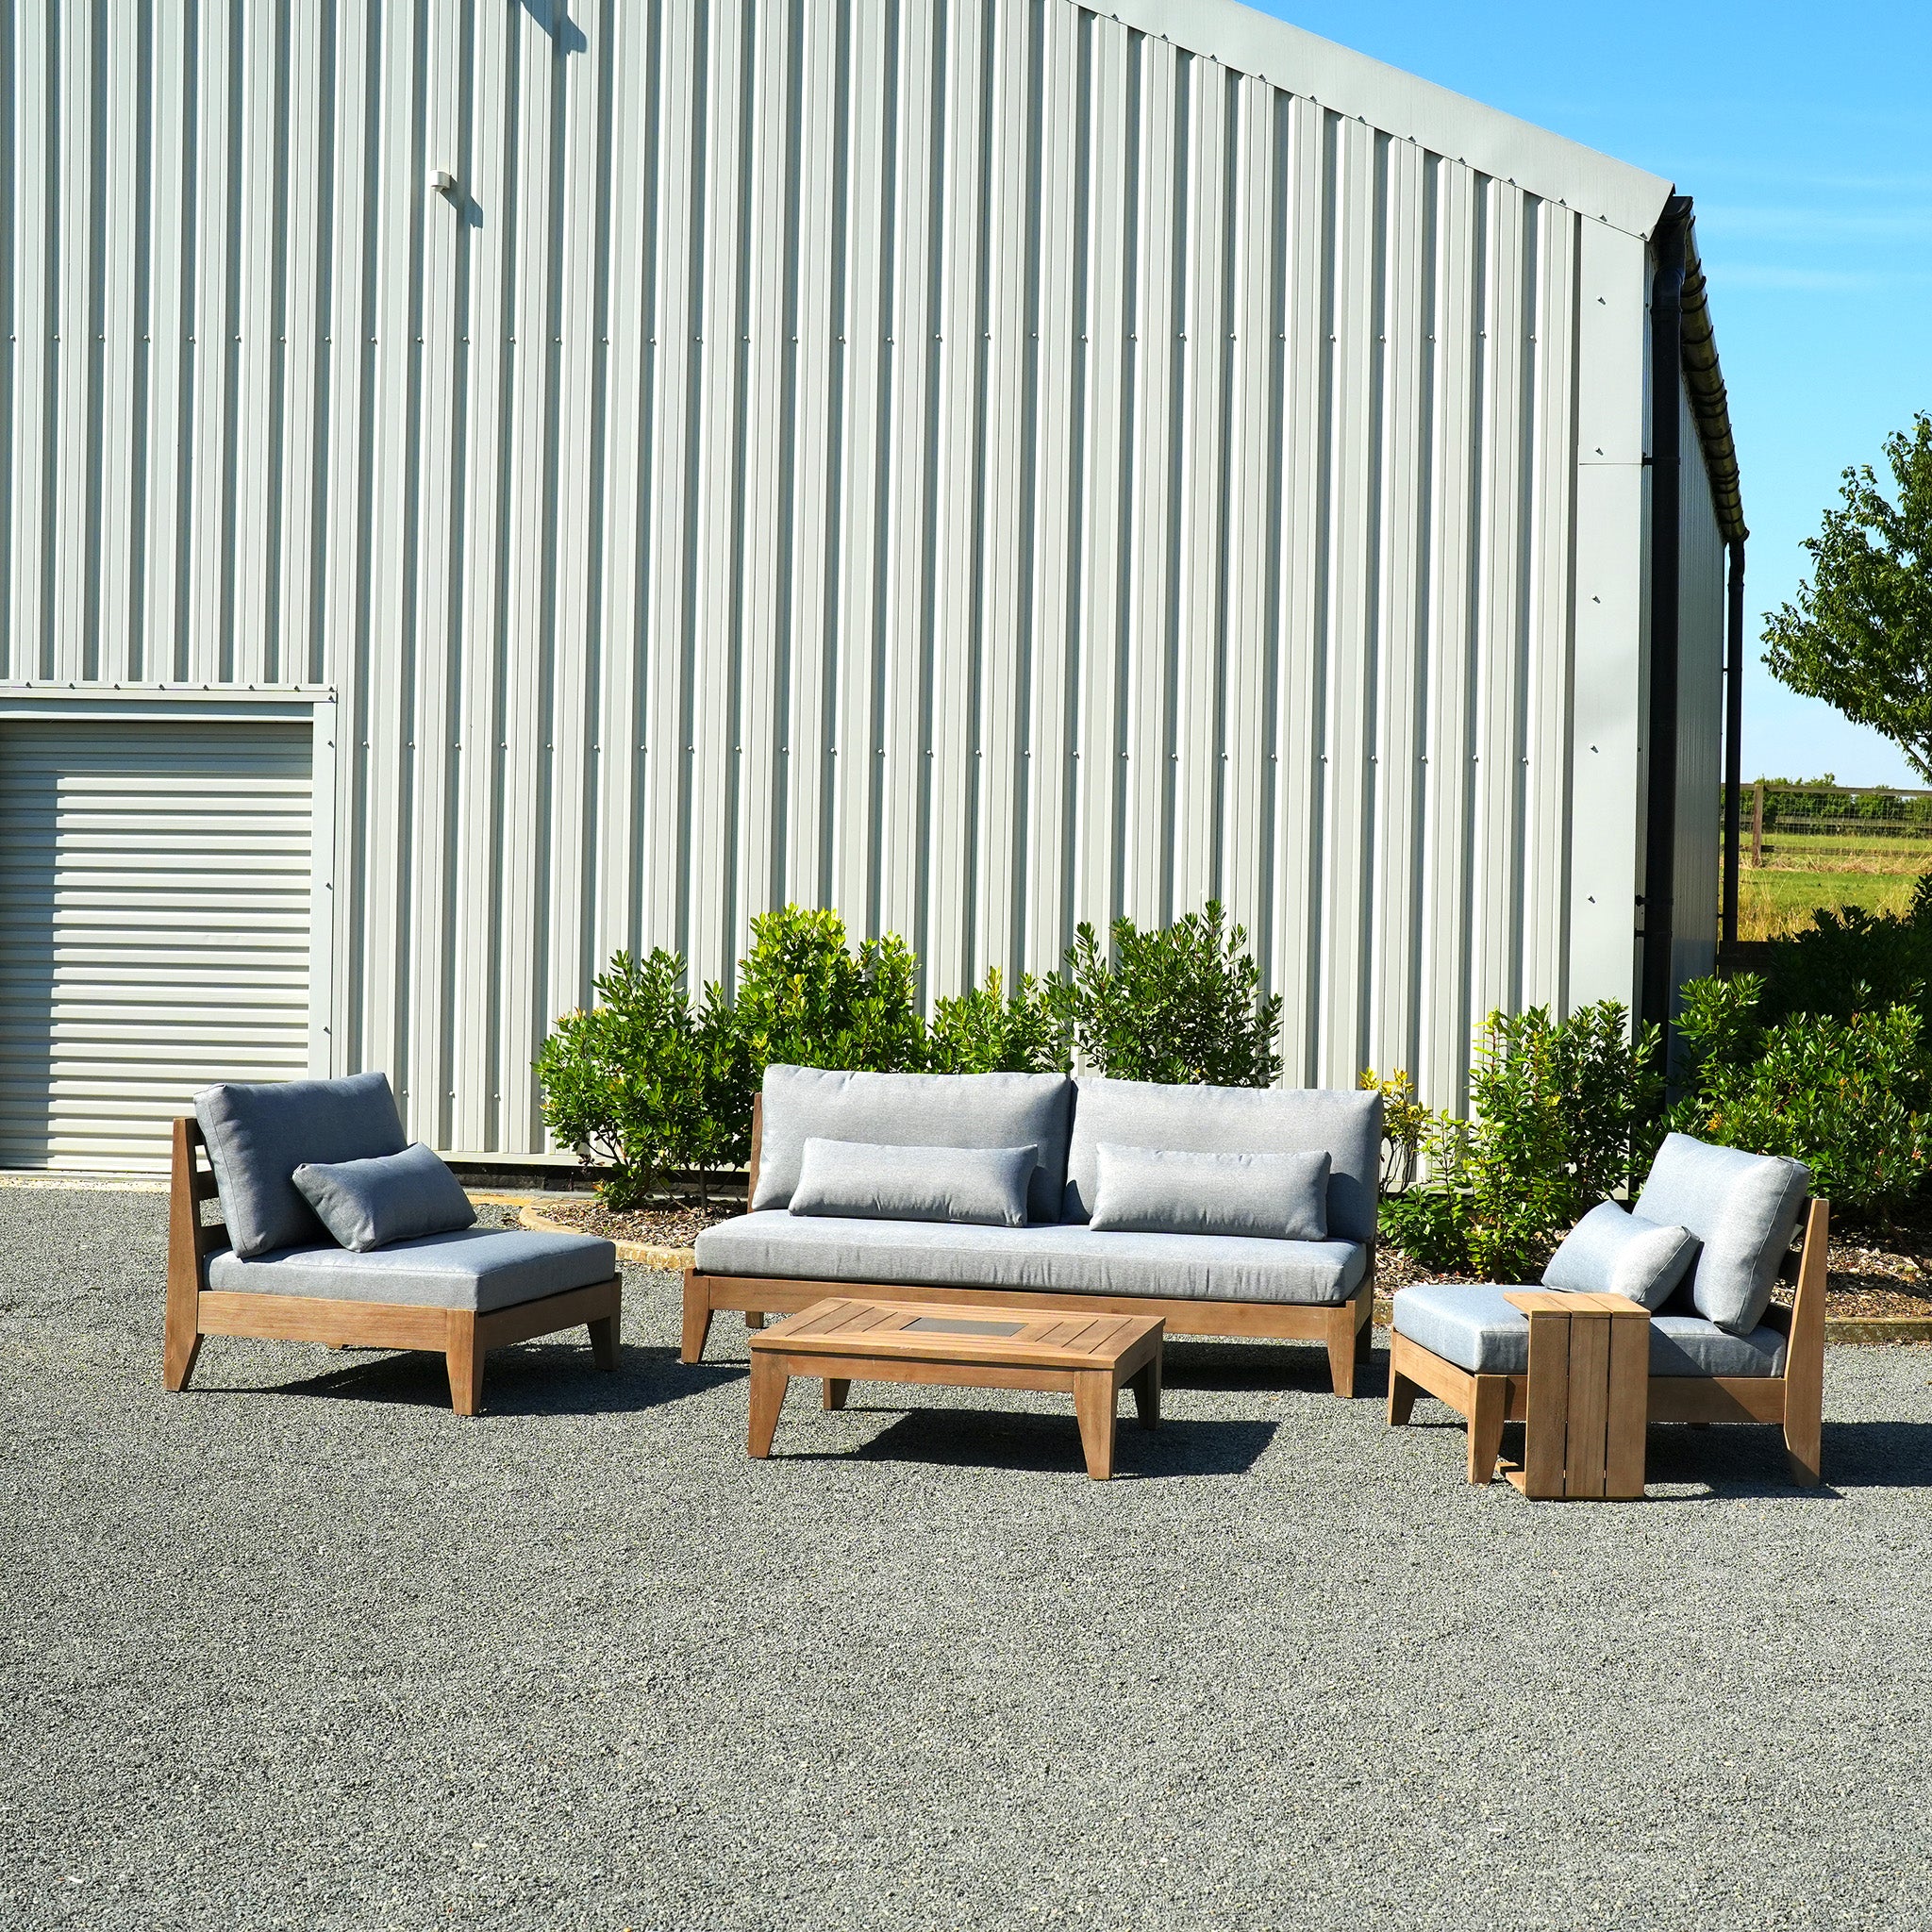 Cano 3 Seat Sofa Set with Coffee & Side Table in Dark Grey (Ex Display)